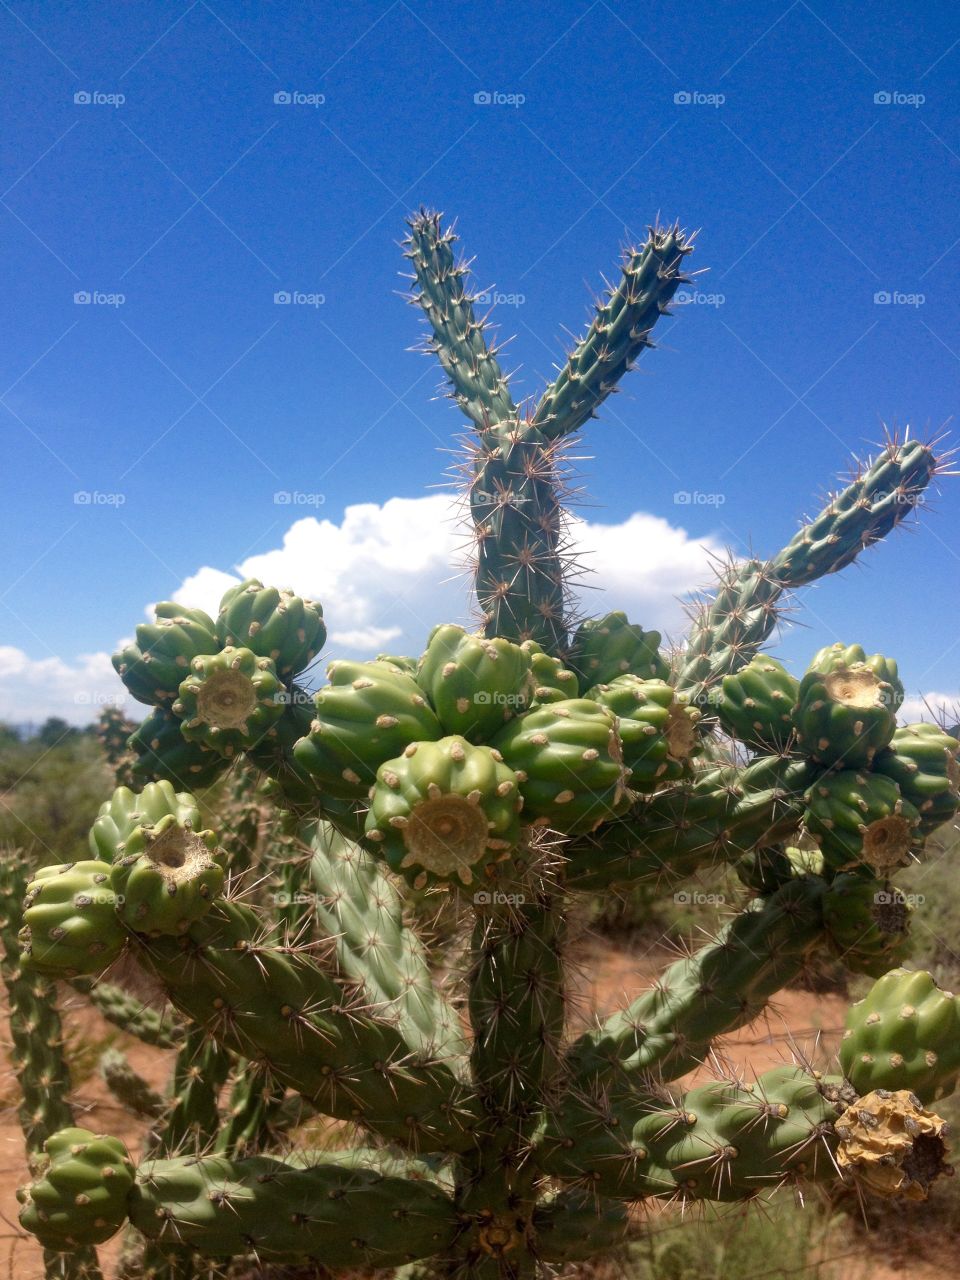 New Mexico Desert . Cactus in Southern NM desert 